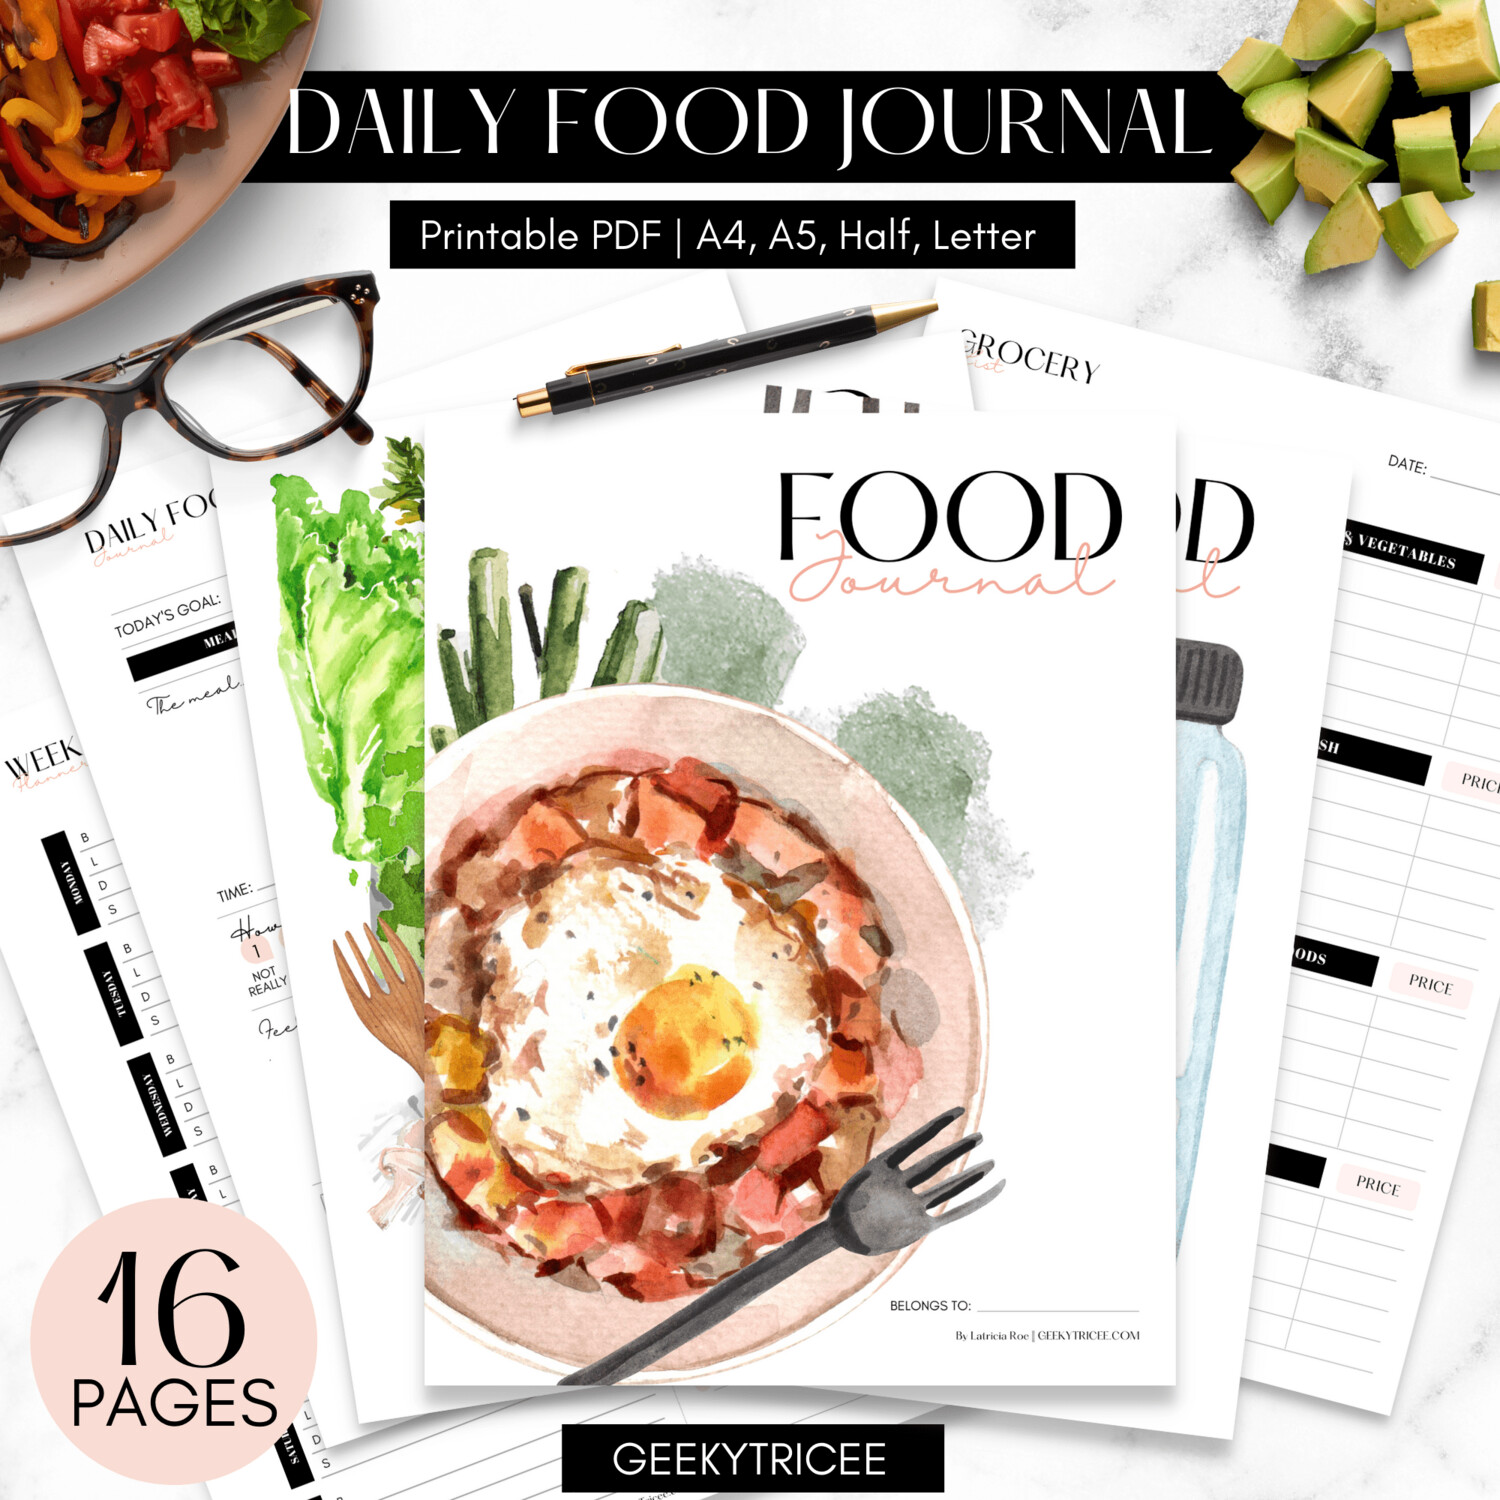 Daily Food Journal | A4, A5, Half, Letter